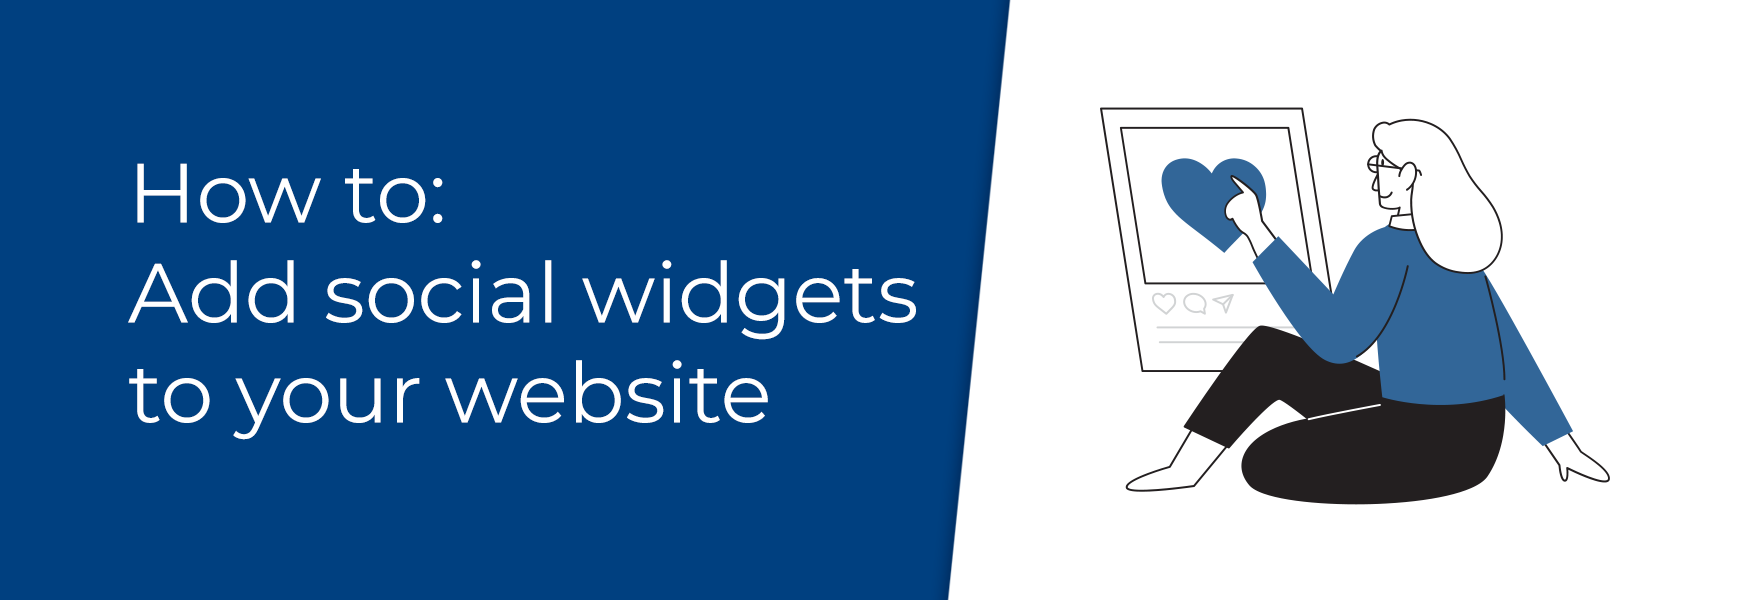 How to: Add social widgets to your website